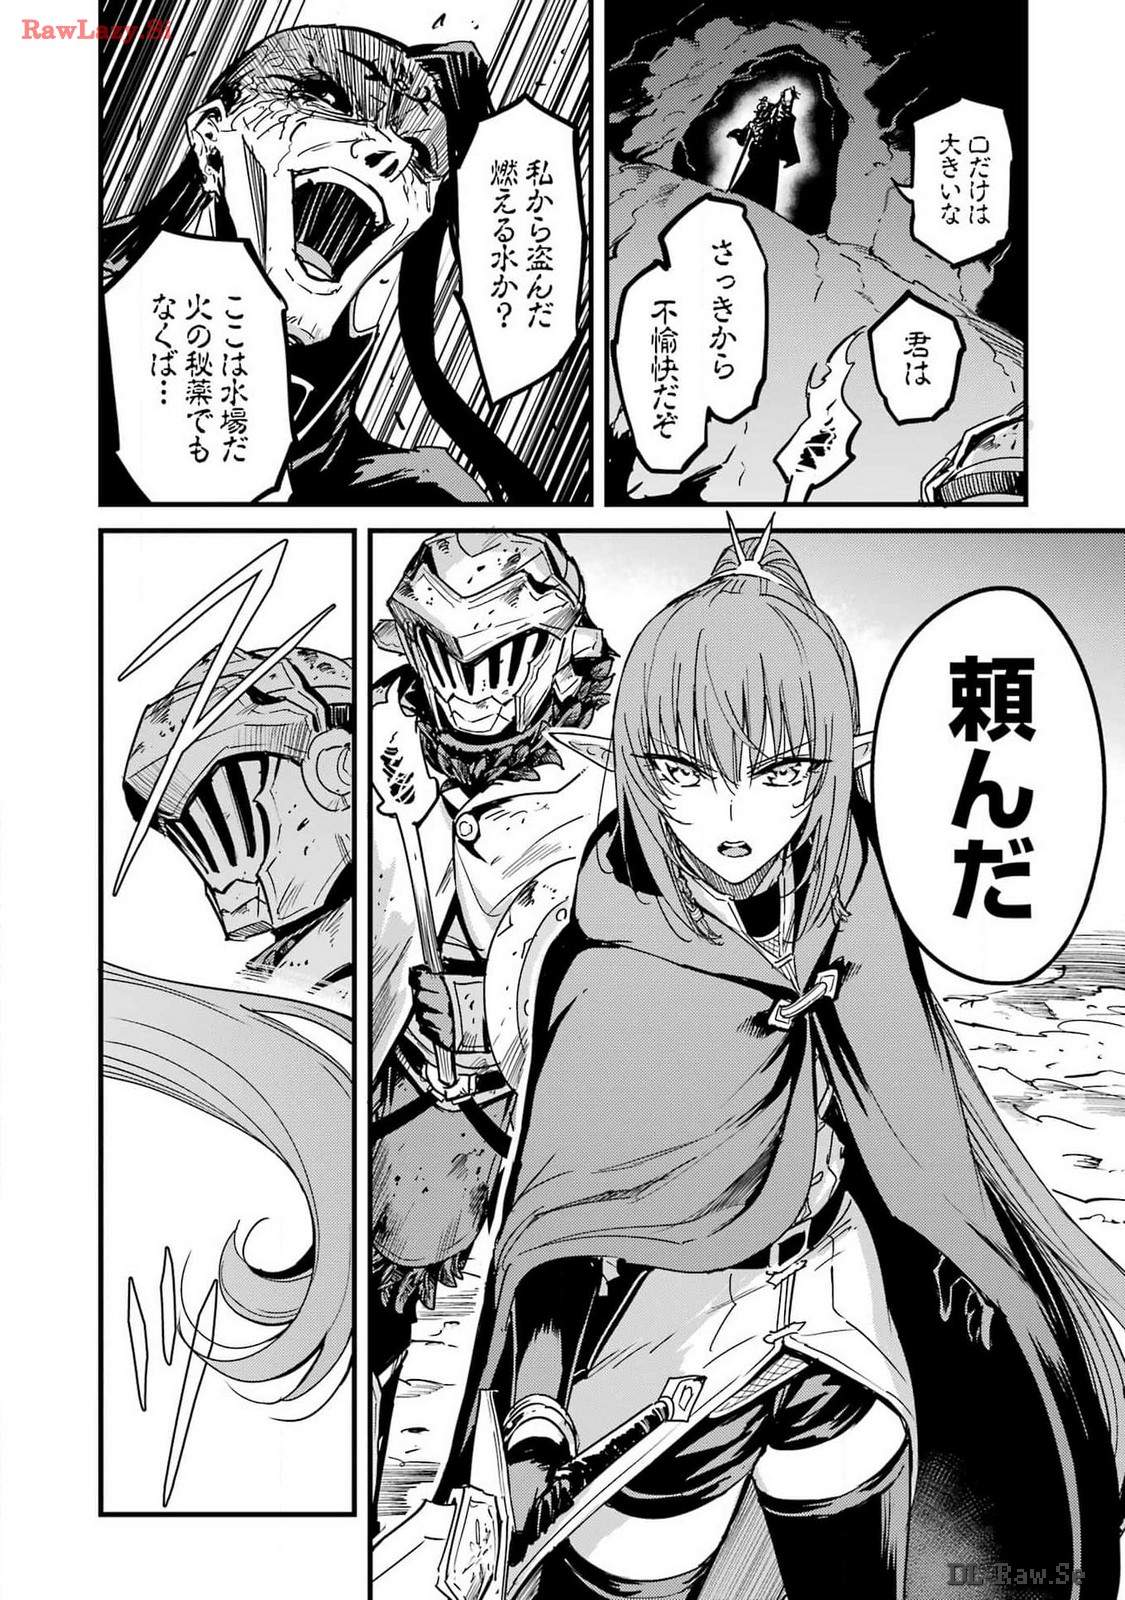 Goblin Slayer: Side Story Year One - Chapter 103 - Page 10